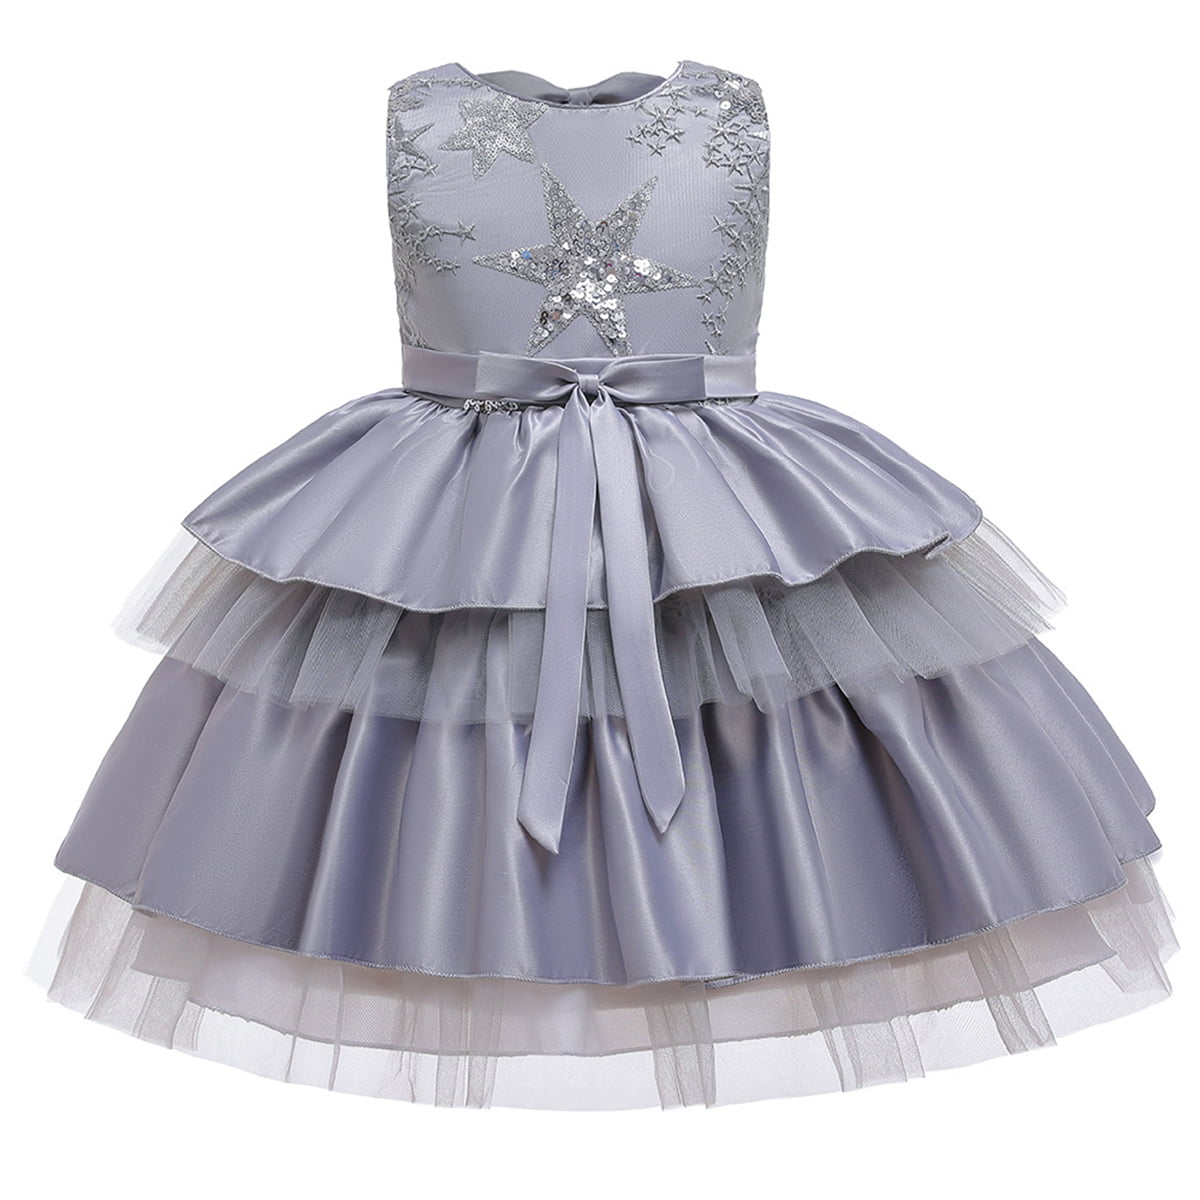 Baby Girls Bowknot Tutu Dress Petals Tulle Dress Flower Gown Outfits Age 6M~4Y 